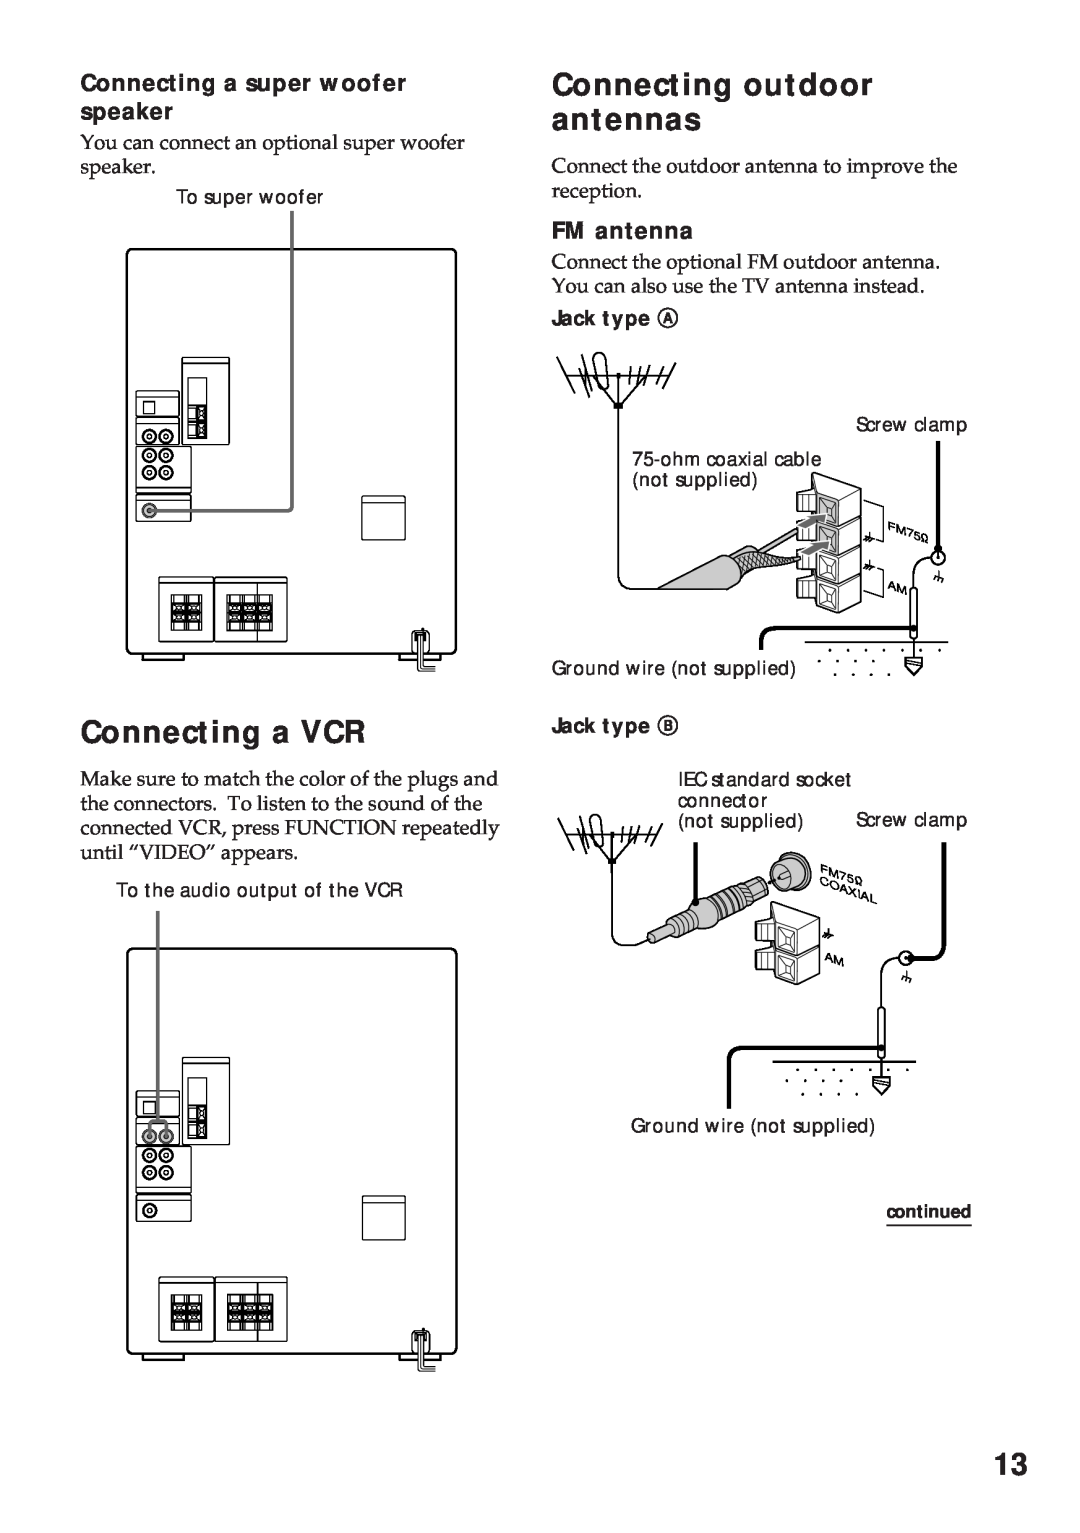 Sony MHC-GRX10AV Connecting a VCR, Connecting outdoor antennas, Connecting a super woofer speaker, FM antenna 